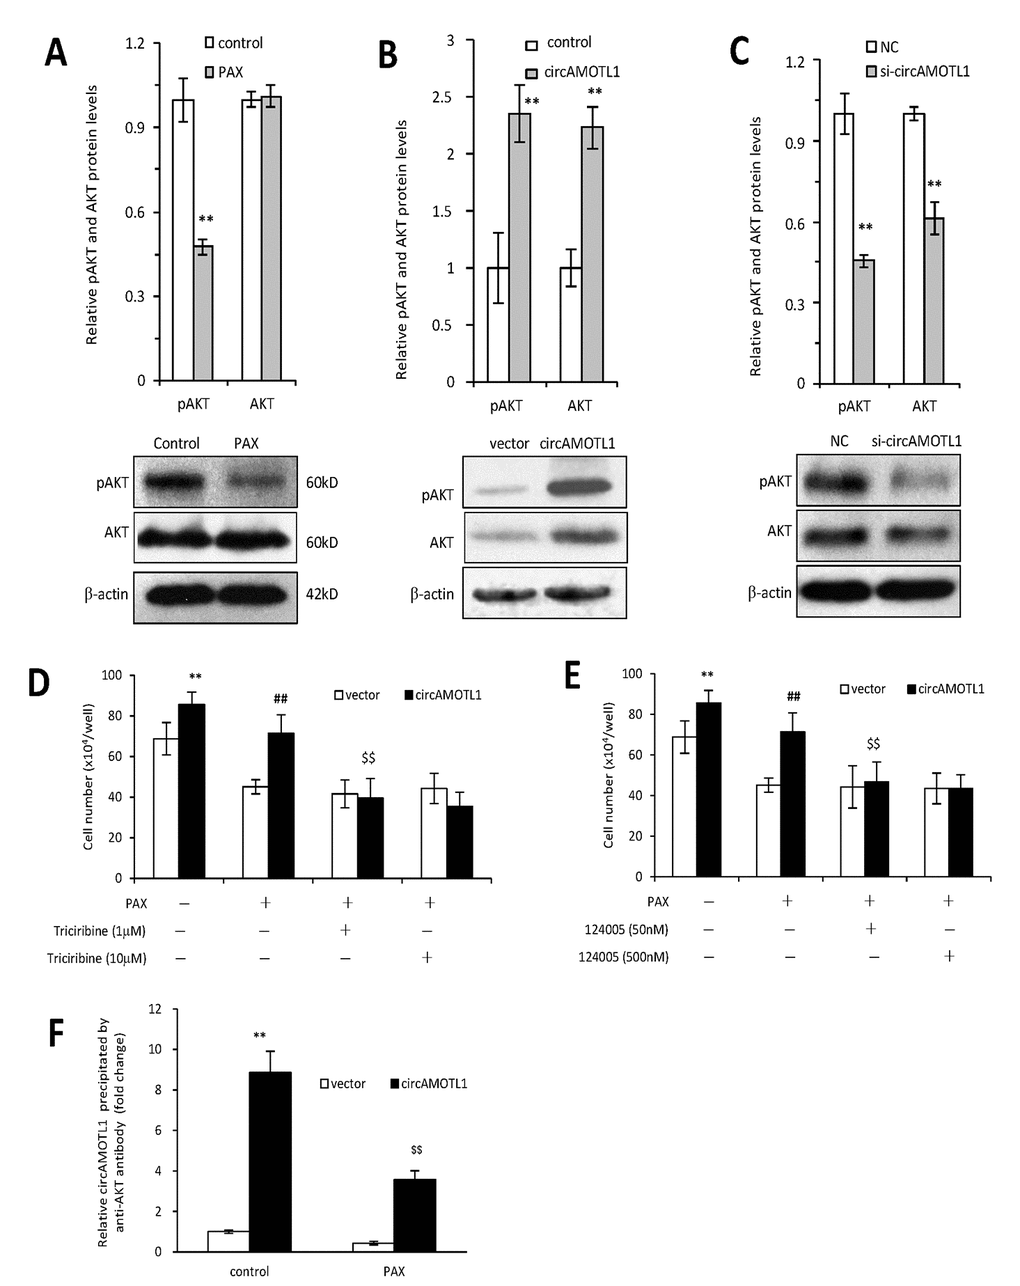 Role of AKT in circAMOTL1 mediated drug resistance. (A) Upper, the protein expression of AKT and phosphorylated AKT were detected in PAX treated MDA-MB-231 cells and quantified. Lower, typical Western blots are shown. (B) Upper, the protein expression of AKT and phosphorylated AKT were detected in vector control and circAMOTL1 transfected cells. Lower, typical Western blots are shown. (C) Upper, the protein expression of AKT and phosphorylated AKT were detected in negative control and circAMOTL1 siRNA transfected cells. Lower, typical Western blots are shown. (D) AKT inhibitor Triciribine was used at the concentrations of 1 and 10 μM to block the effect of AKT pathway, and cell viability was measured. n=8. **p##p$$pE) AKT inhibitor, 124005, was used at the concentrations of 50 and 500 nM to block the effect of AKT pathway, and cell viability was measured. n=8. **p##p$$pF) The circAMOTL1 expression after immunoprecipitation with phosphorylated AKT antibody (Ser473) in PAX treated MDA-MB-231 cells. n=4 **p$$p